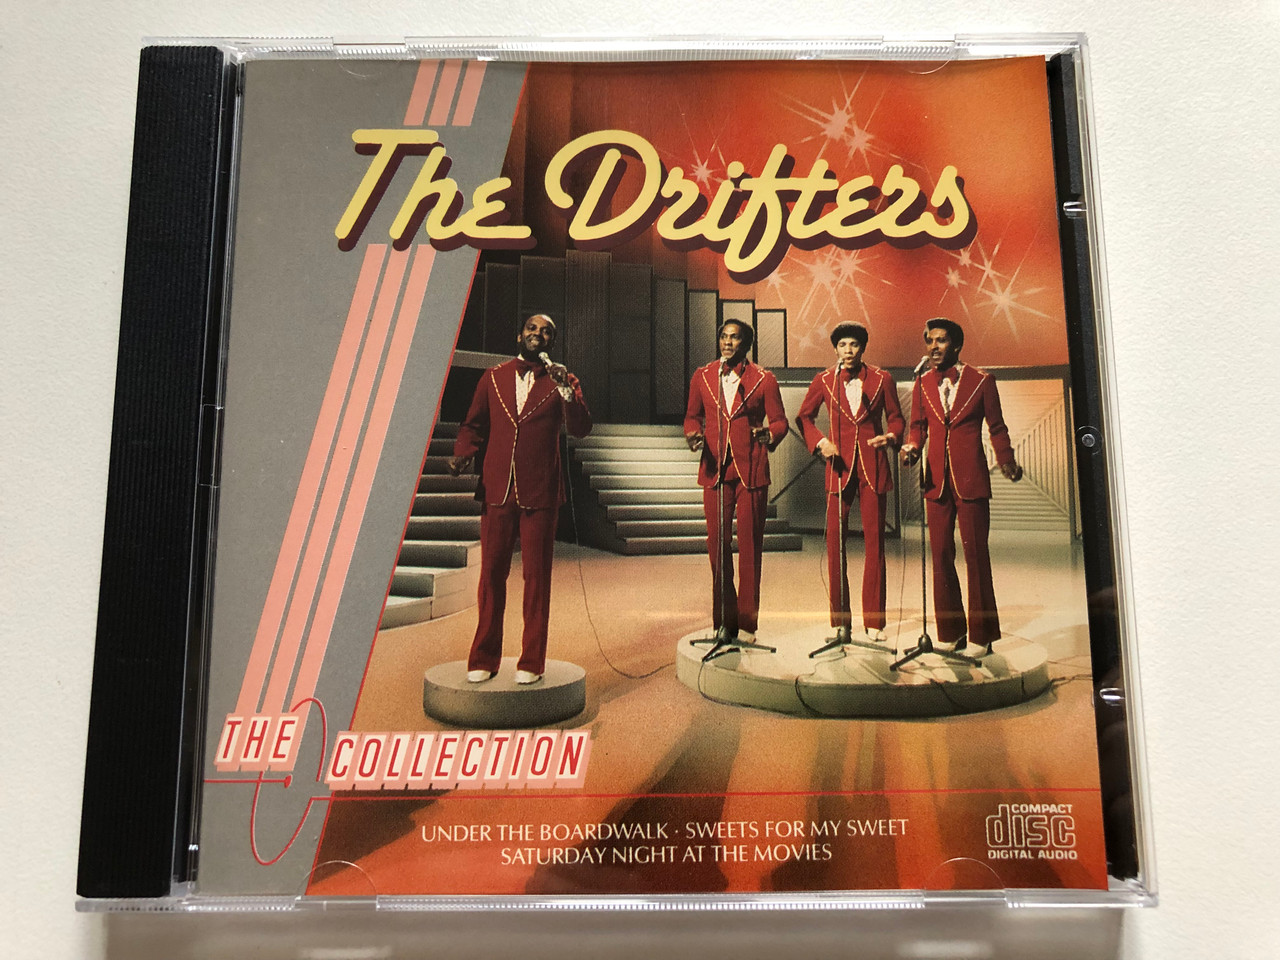 https://cdn10.bigcommerce.com/s-62bdpkt7pb/products/0/images/306634/The_Drifters_The_Collection_Under_The_Boardwalk_Sweets_For_My_Sweet_Saturday_Night_At_The_Movies_Object_Enterprises_Audio_CD_1986_R0007_1__63140.1698328893.1280.1280.JPG?c=2